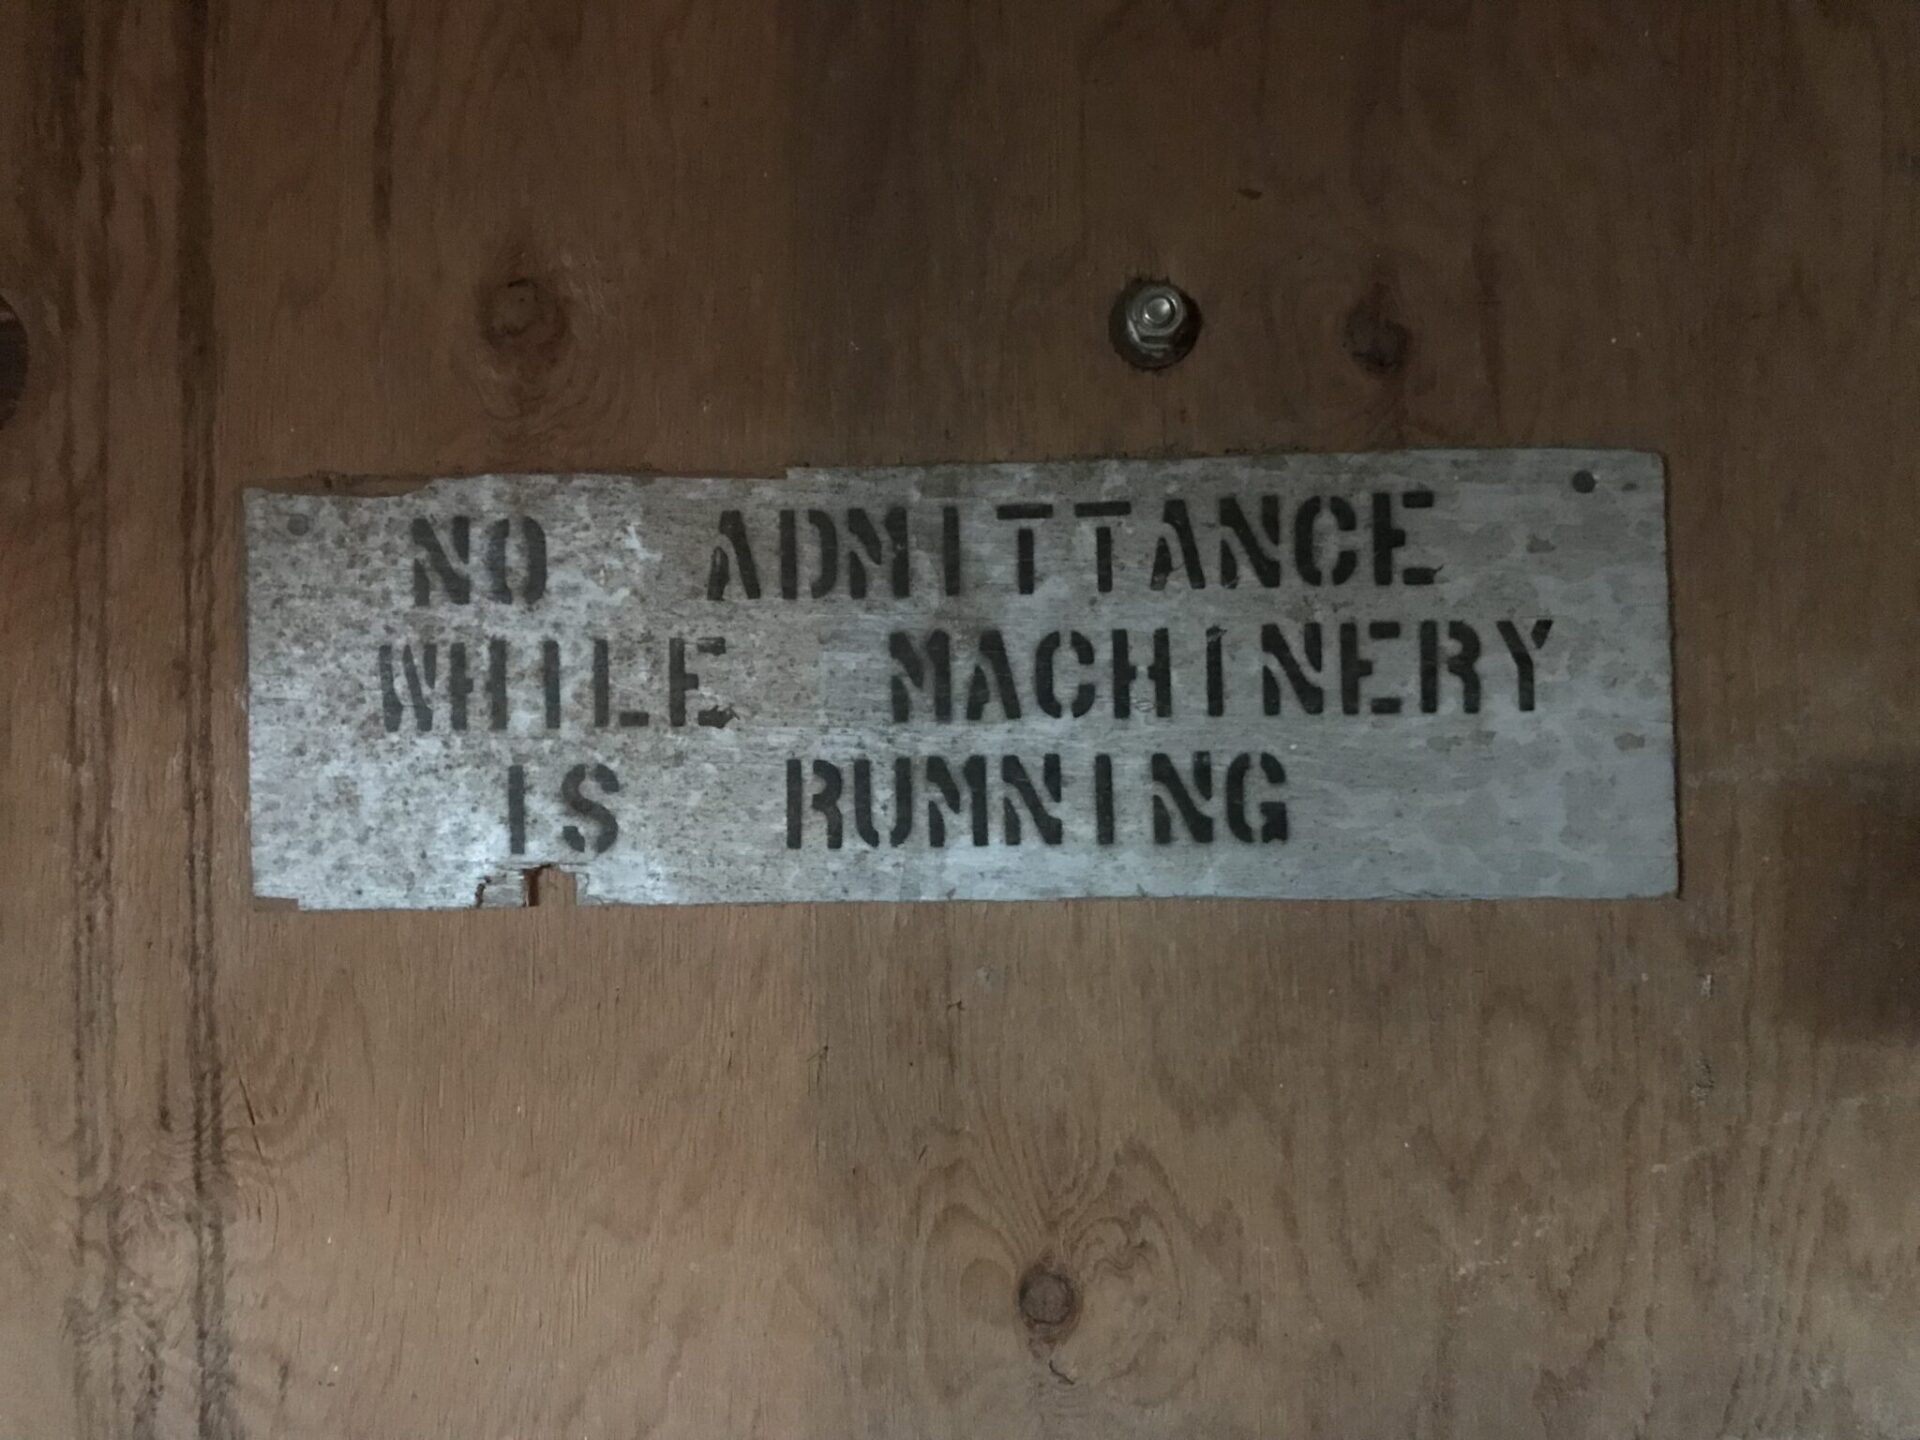 A sign reads "No admittance while machinery is running"